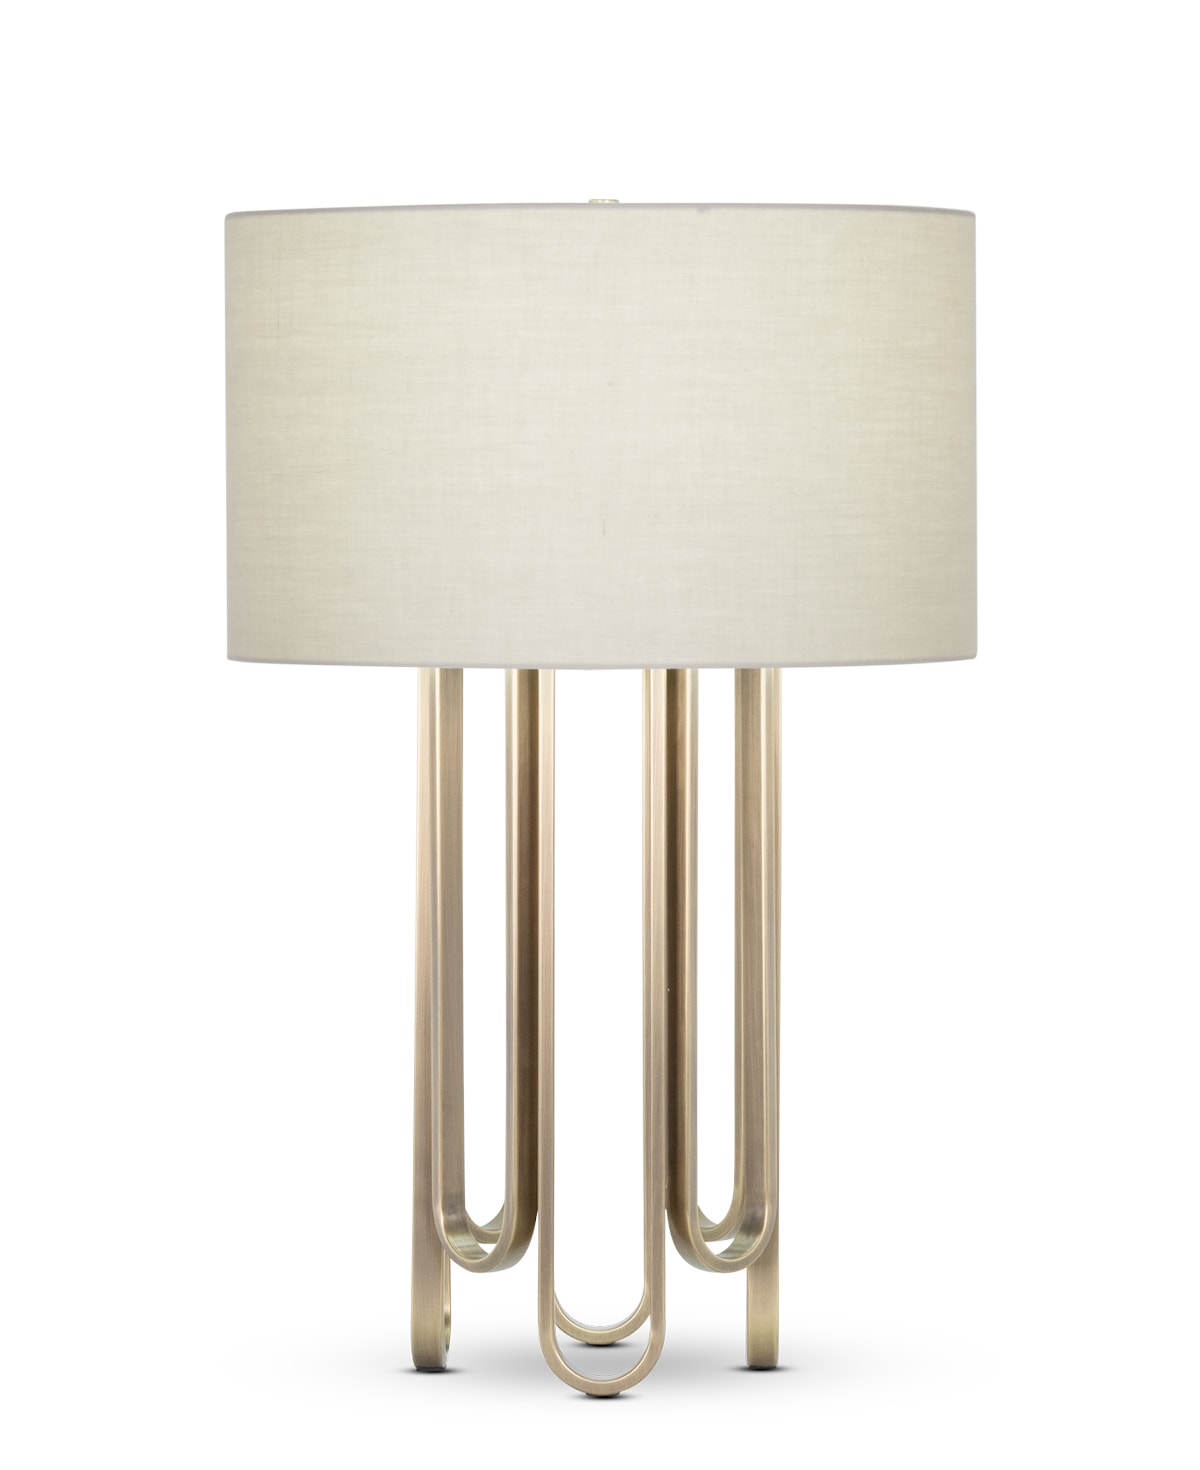 FlowDecor Deanna Table Lamp in metal with antique brass finish and beige cotton drum shade (# 4485)